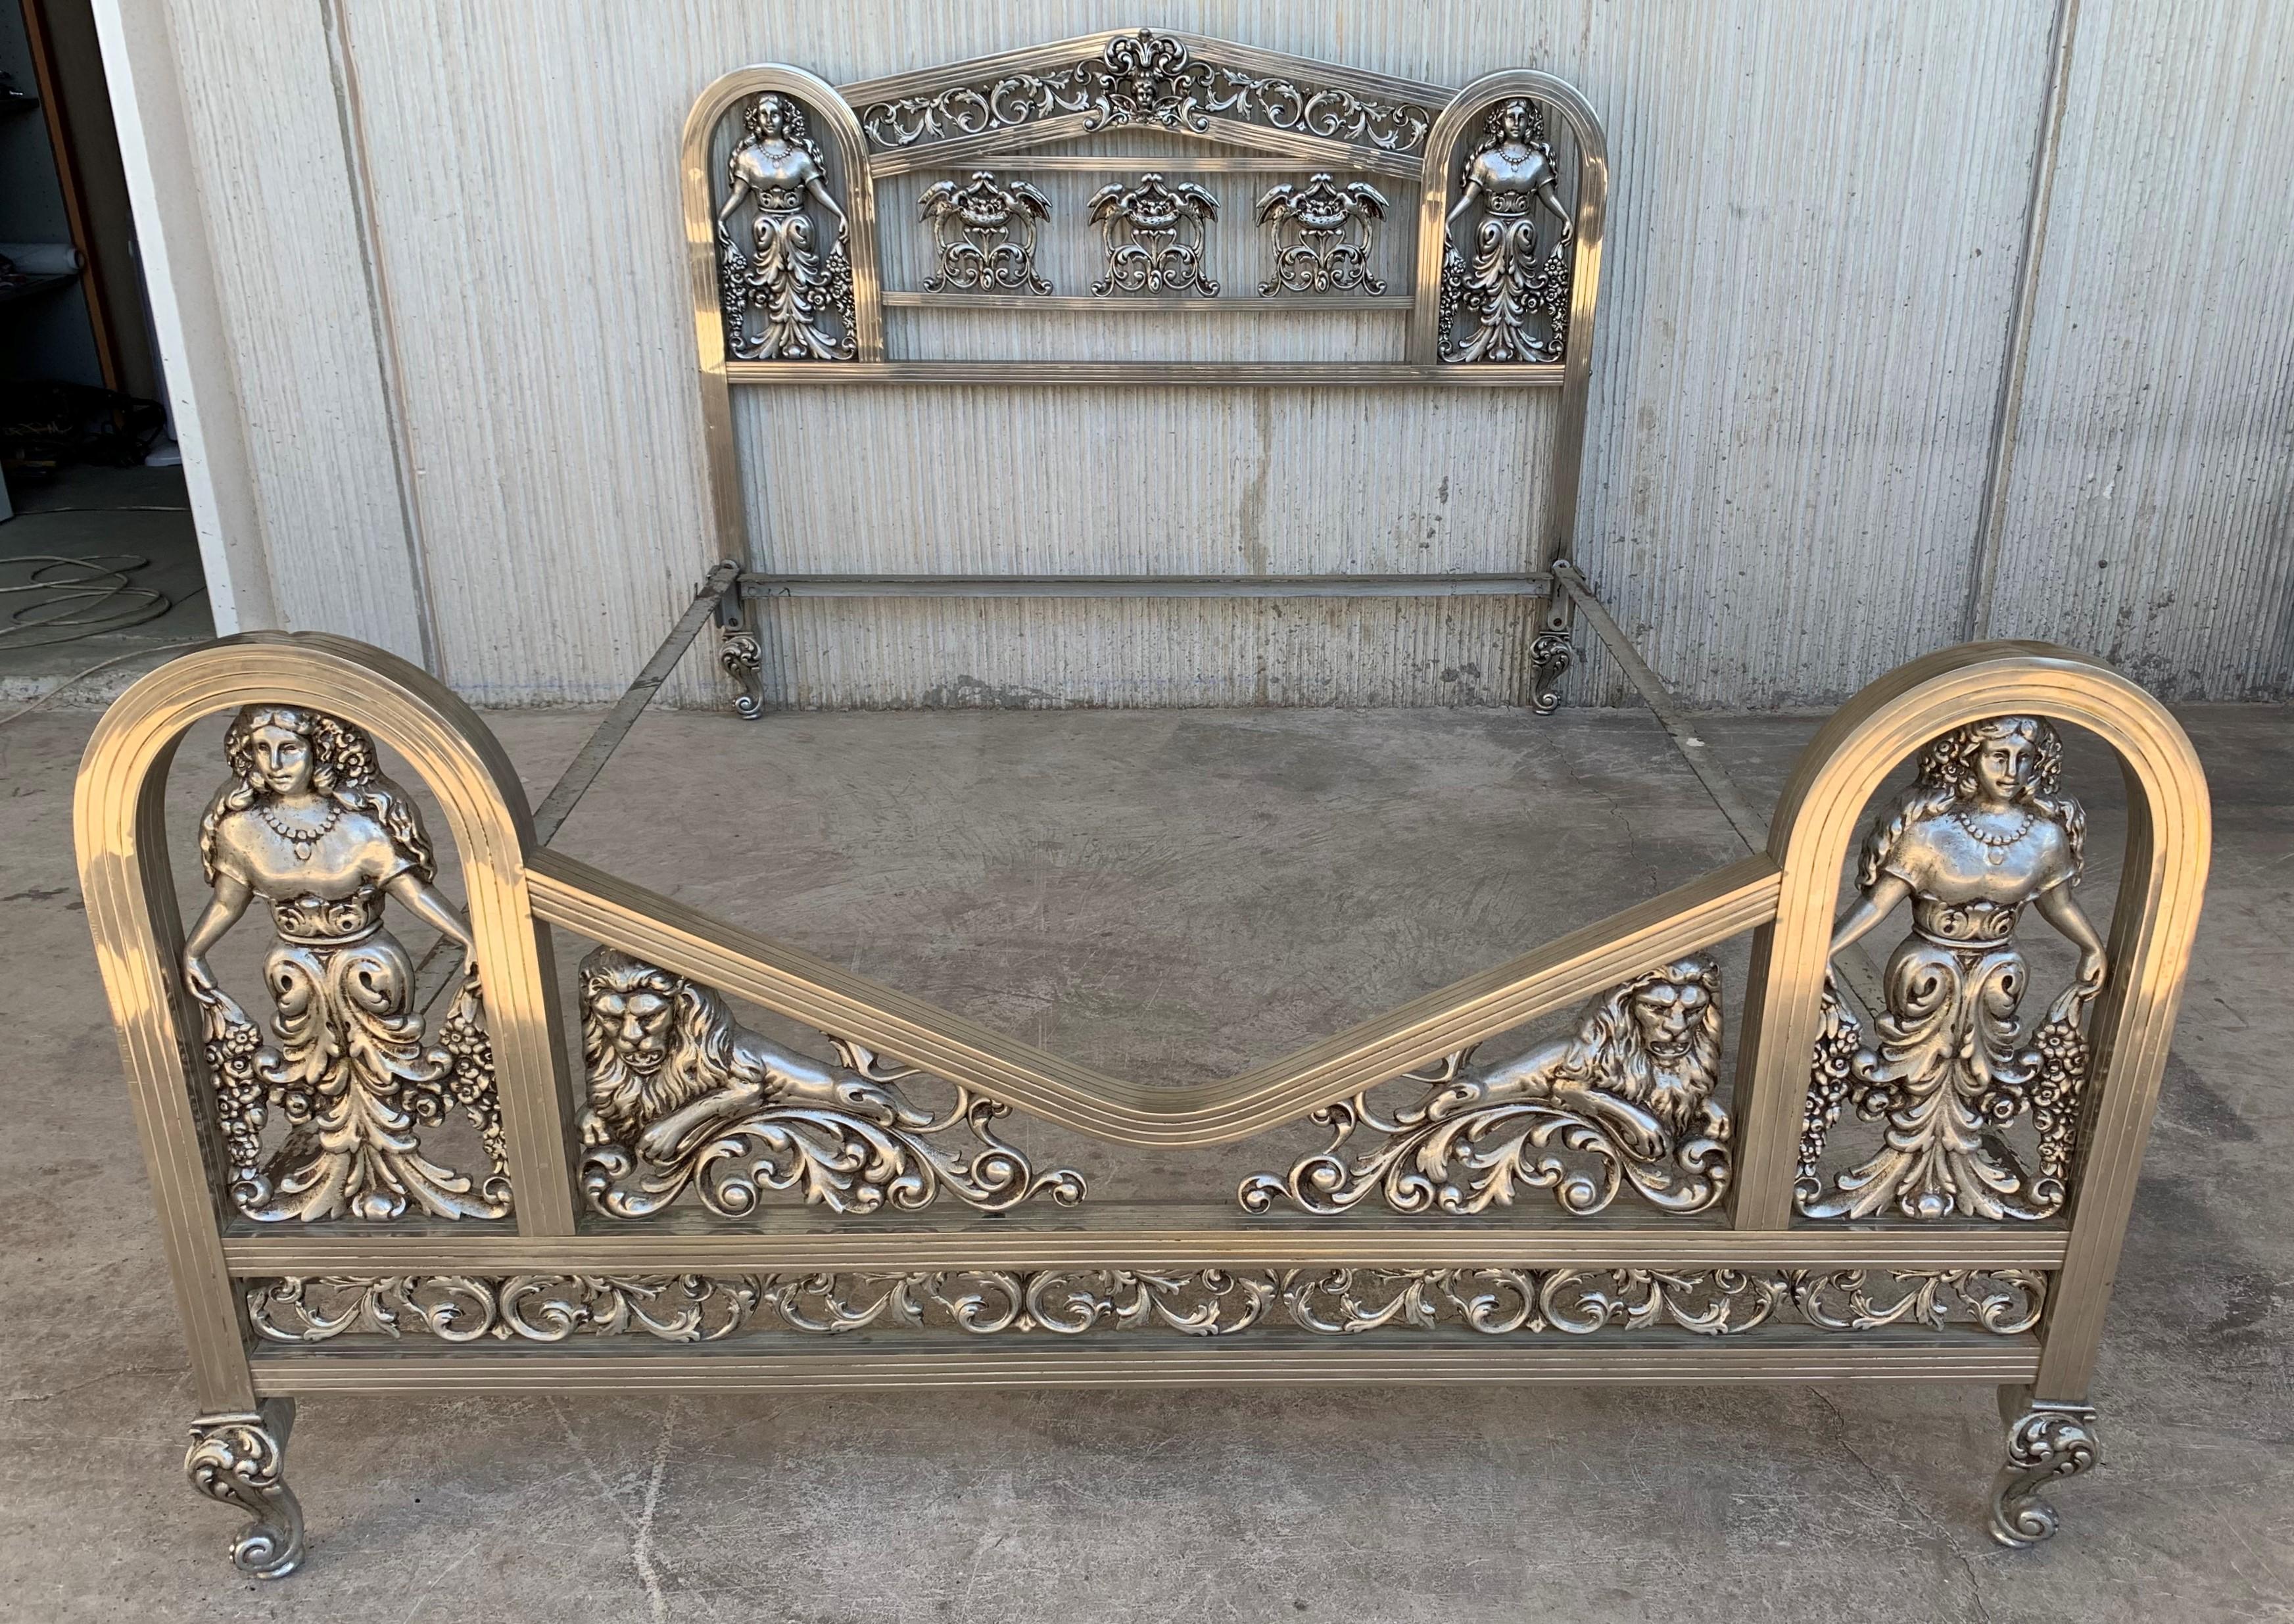 French Art Deco chrome bed with reliefs depicting a Goddess and lions with ornamental decorations.